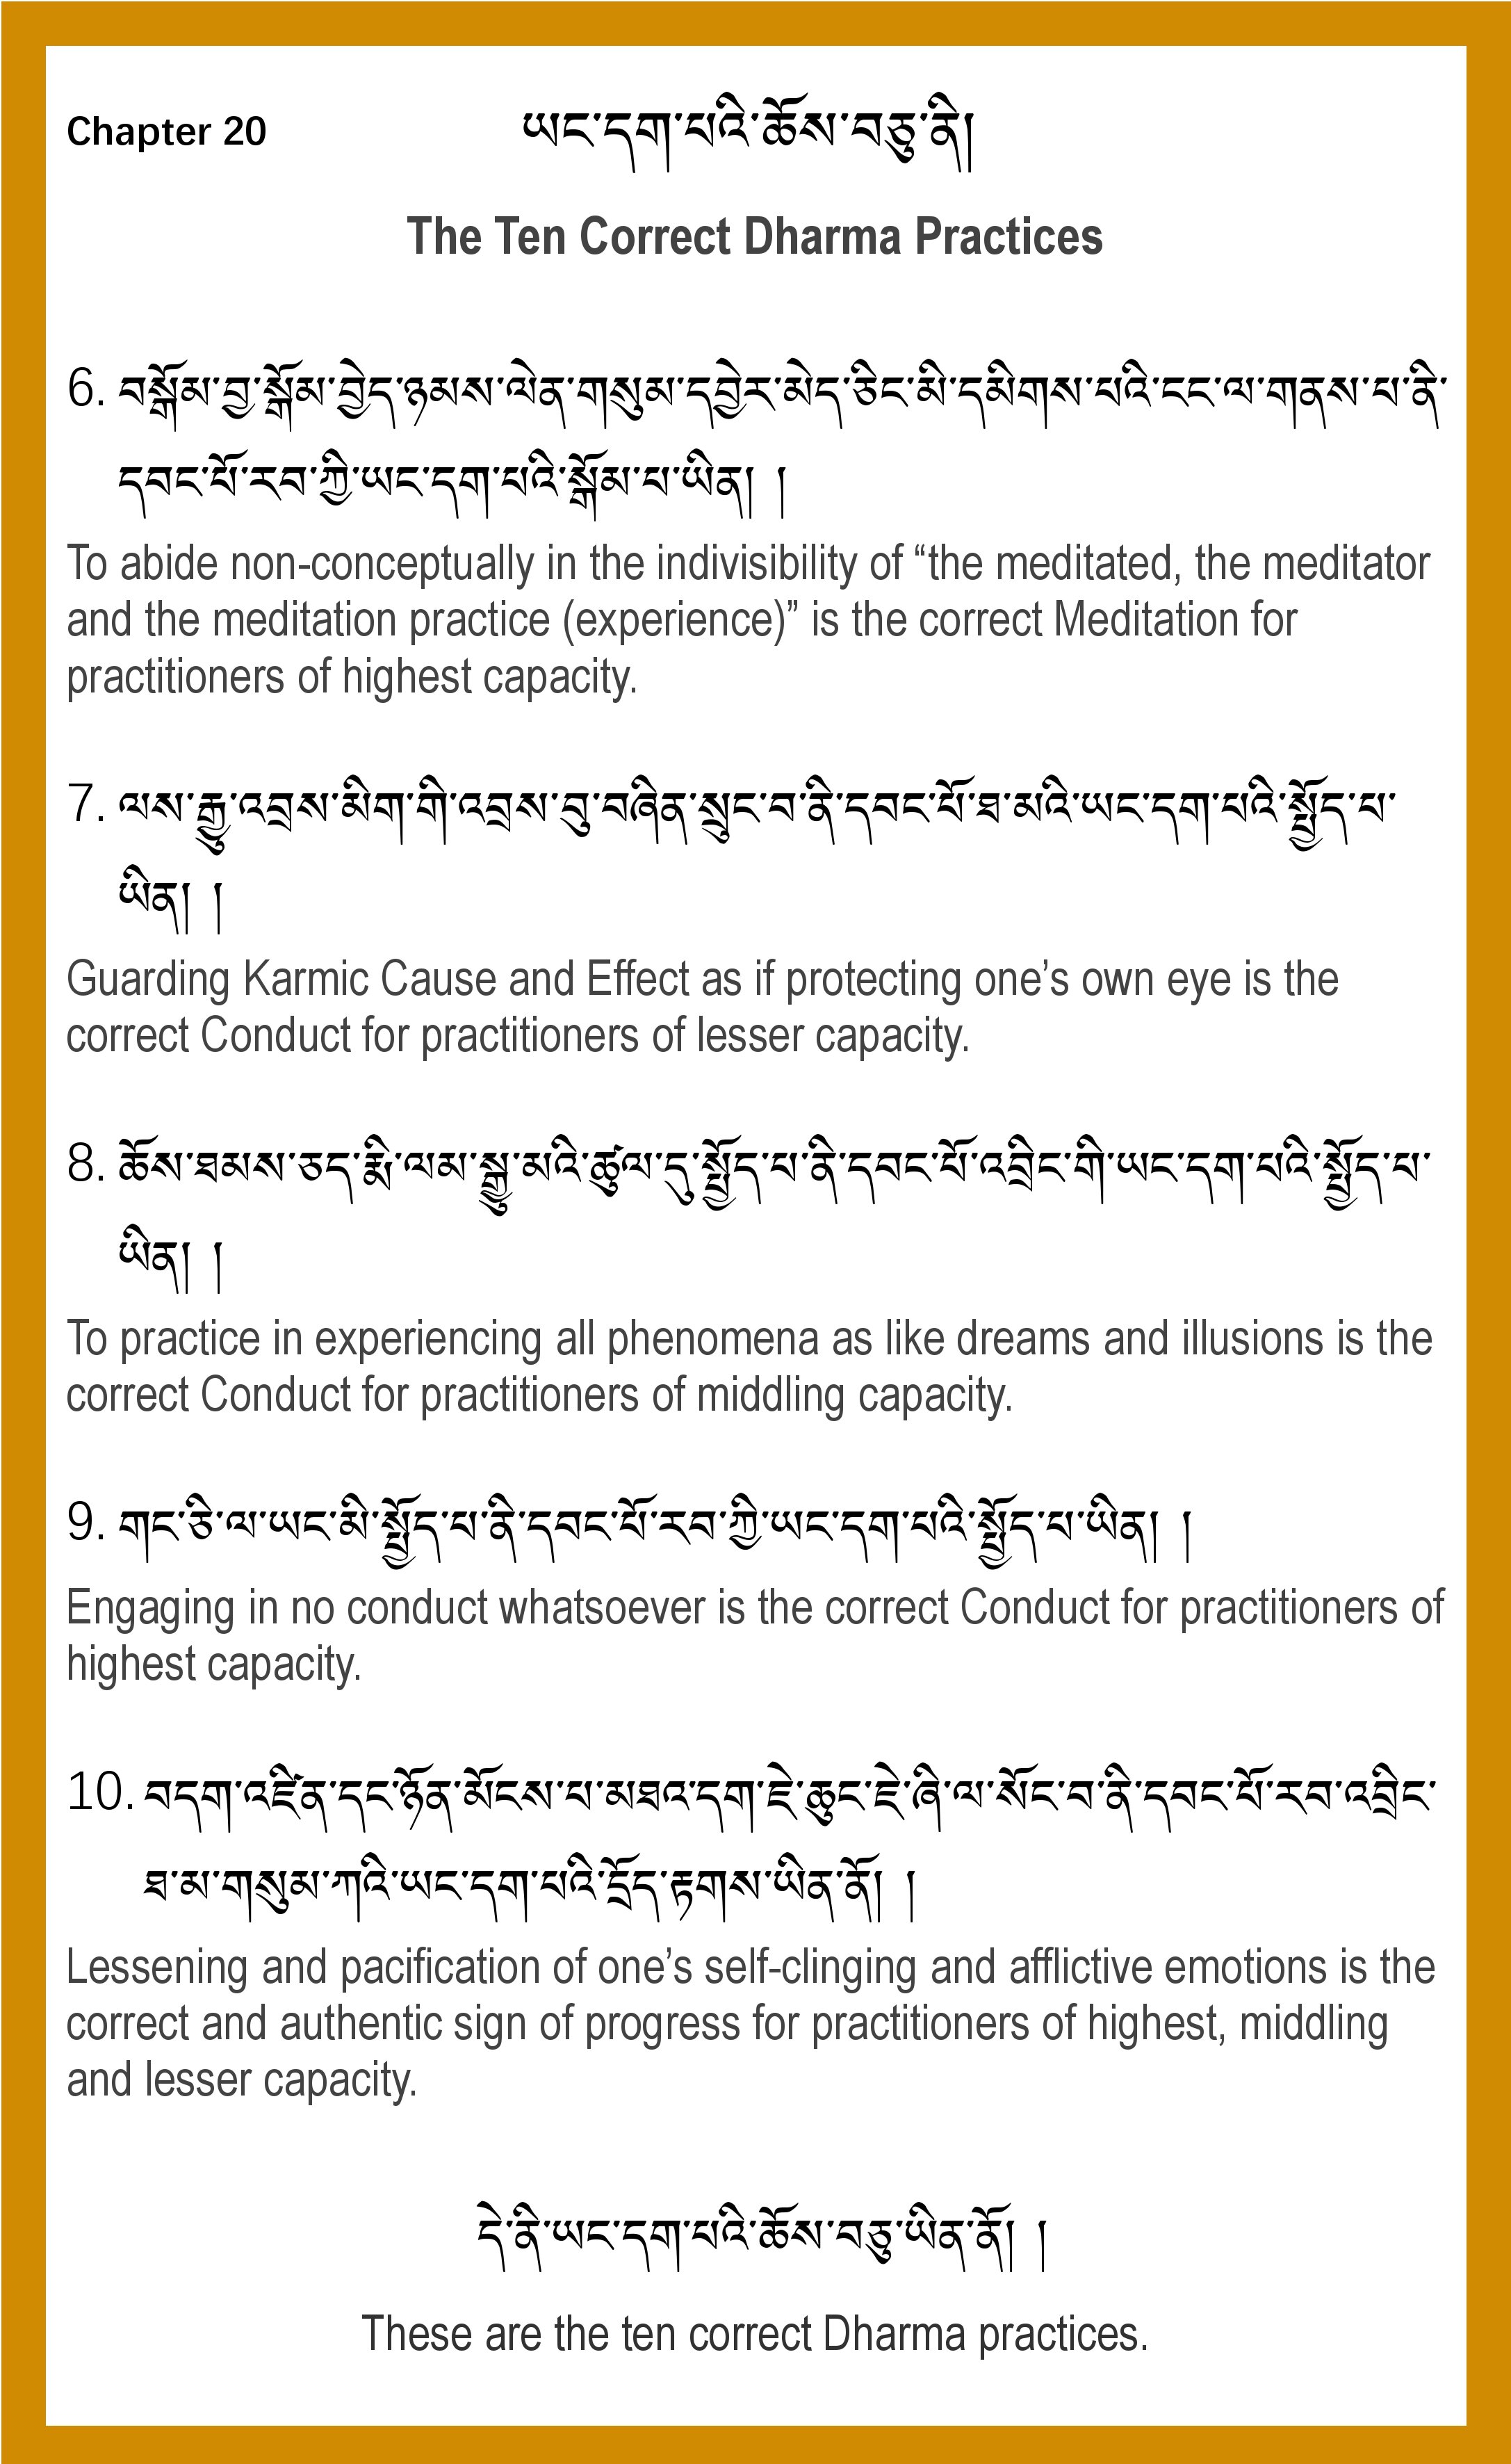 20-PGSP-The 10 Correct Dharma Practices0004.jpg